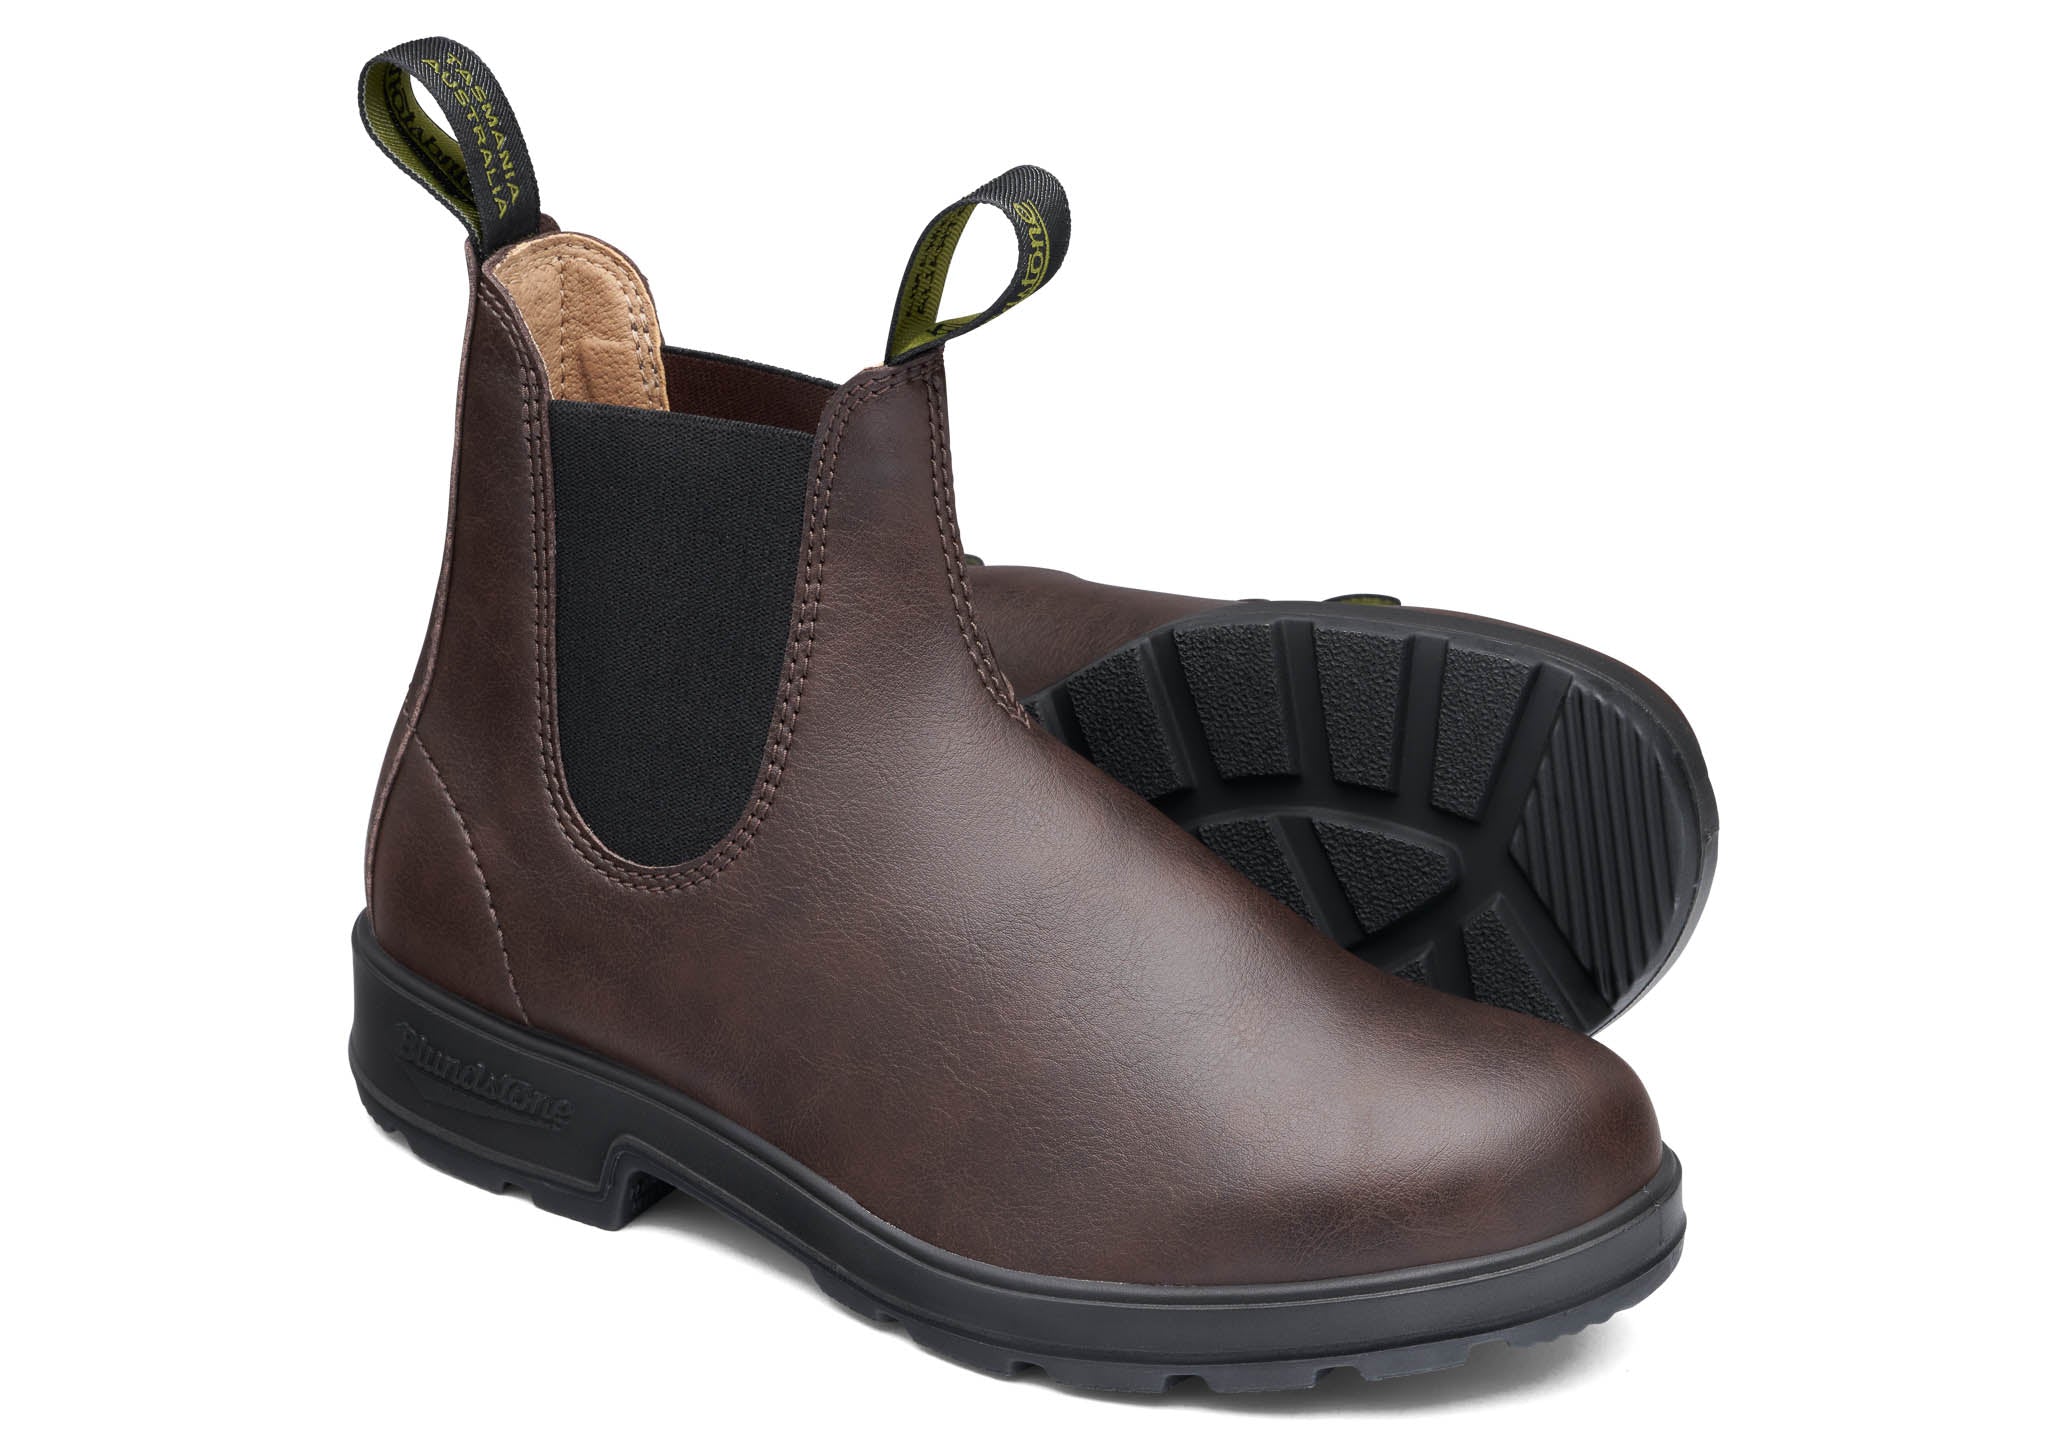 Blundstone #2116 - The Original Vegan Boot in Brown profile and bottom sole